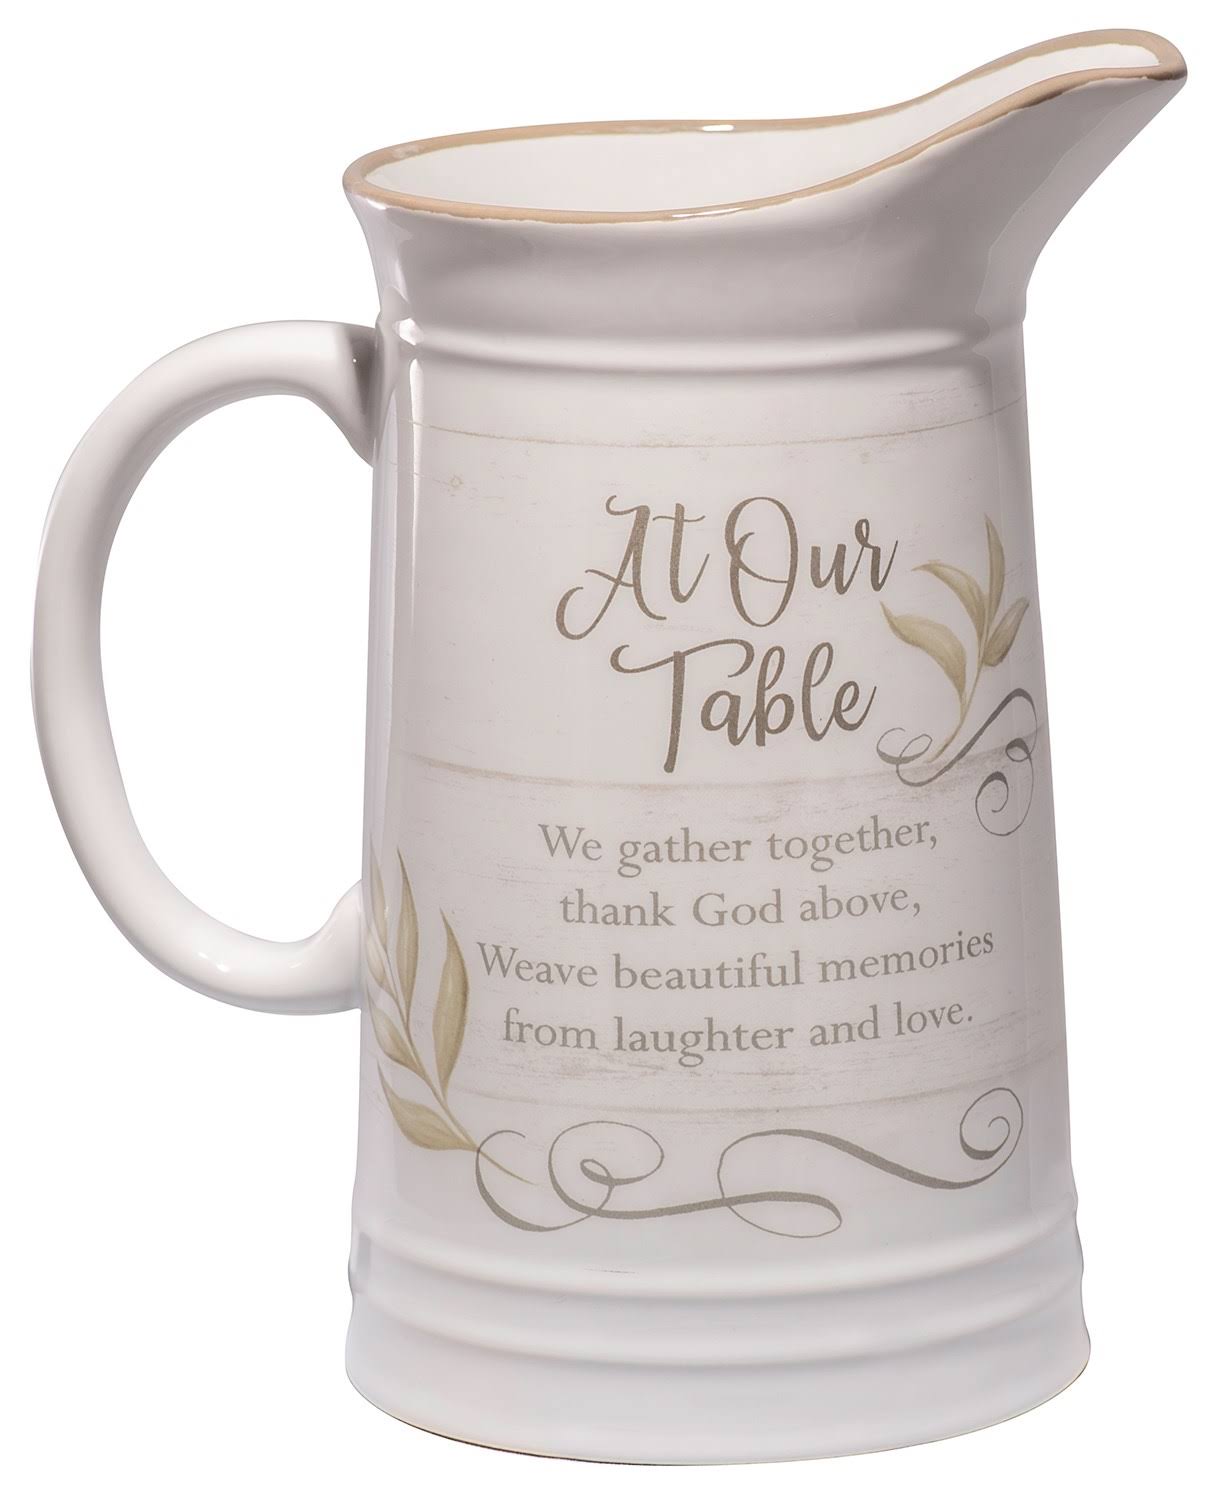 Water Pitcher-At Our Table (32 oz)